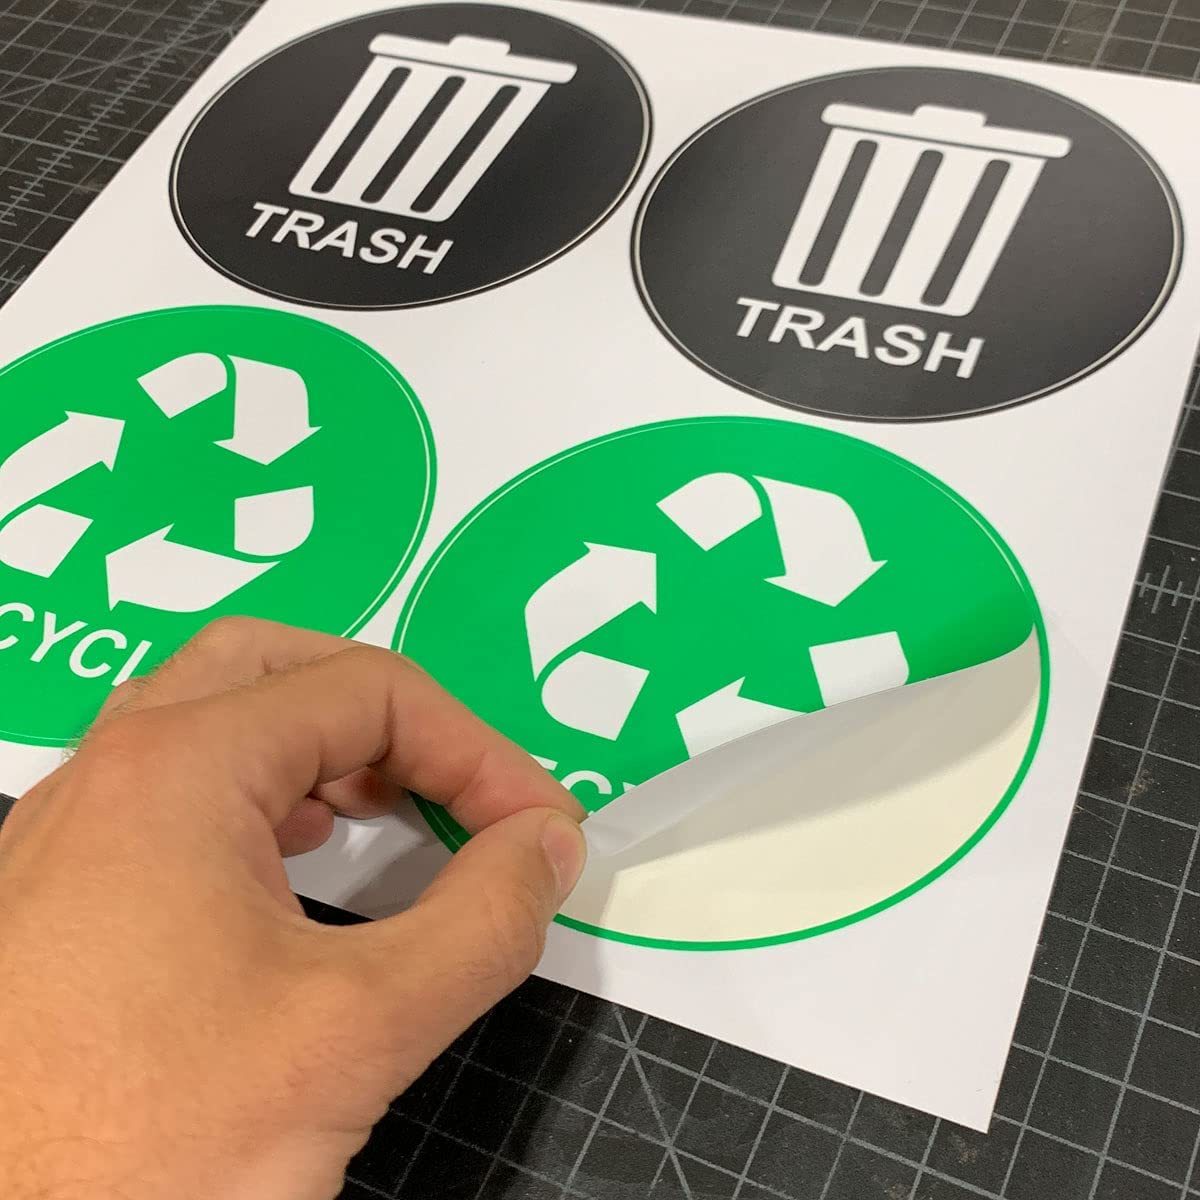 Trash and Recycle Printed Vinyl Decals, UV Lamination